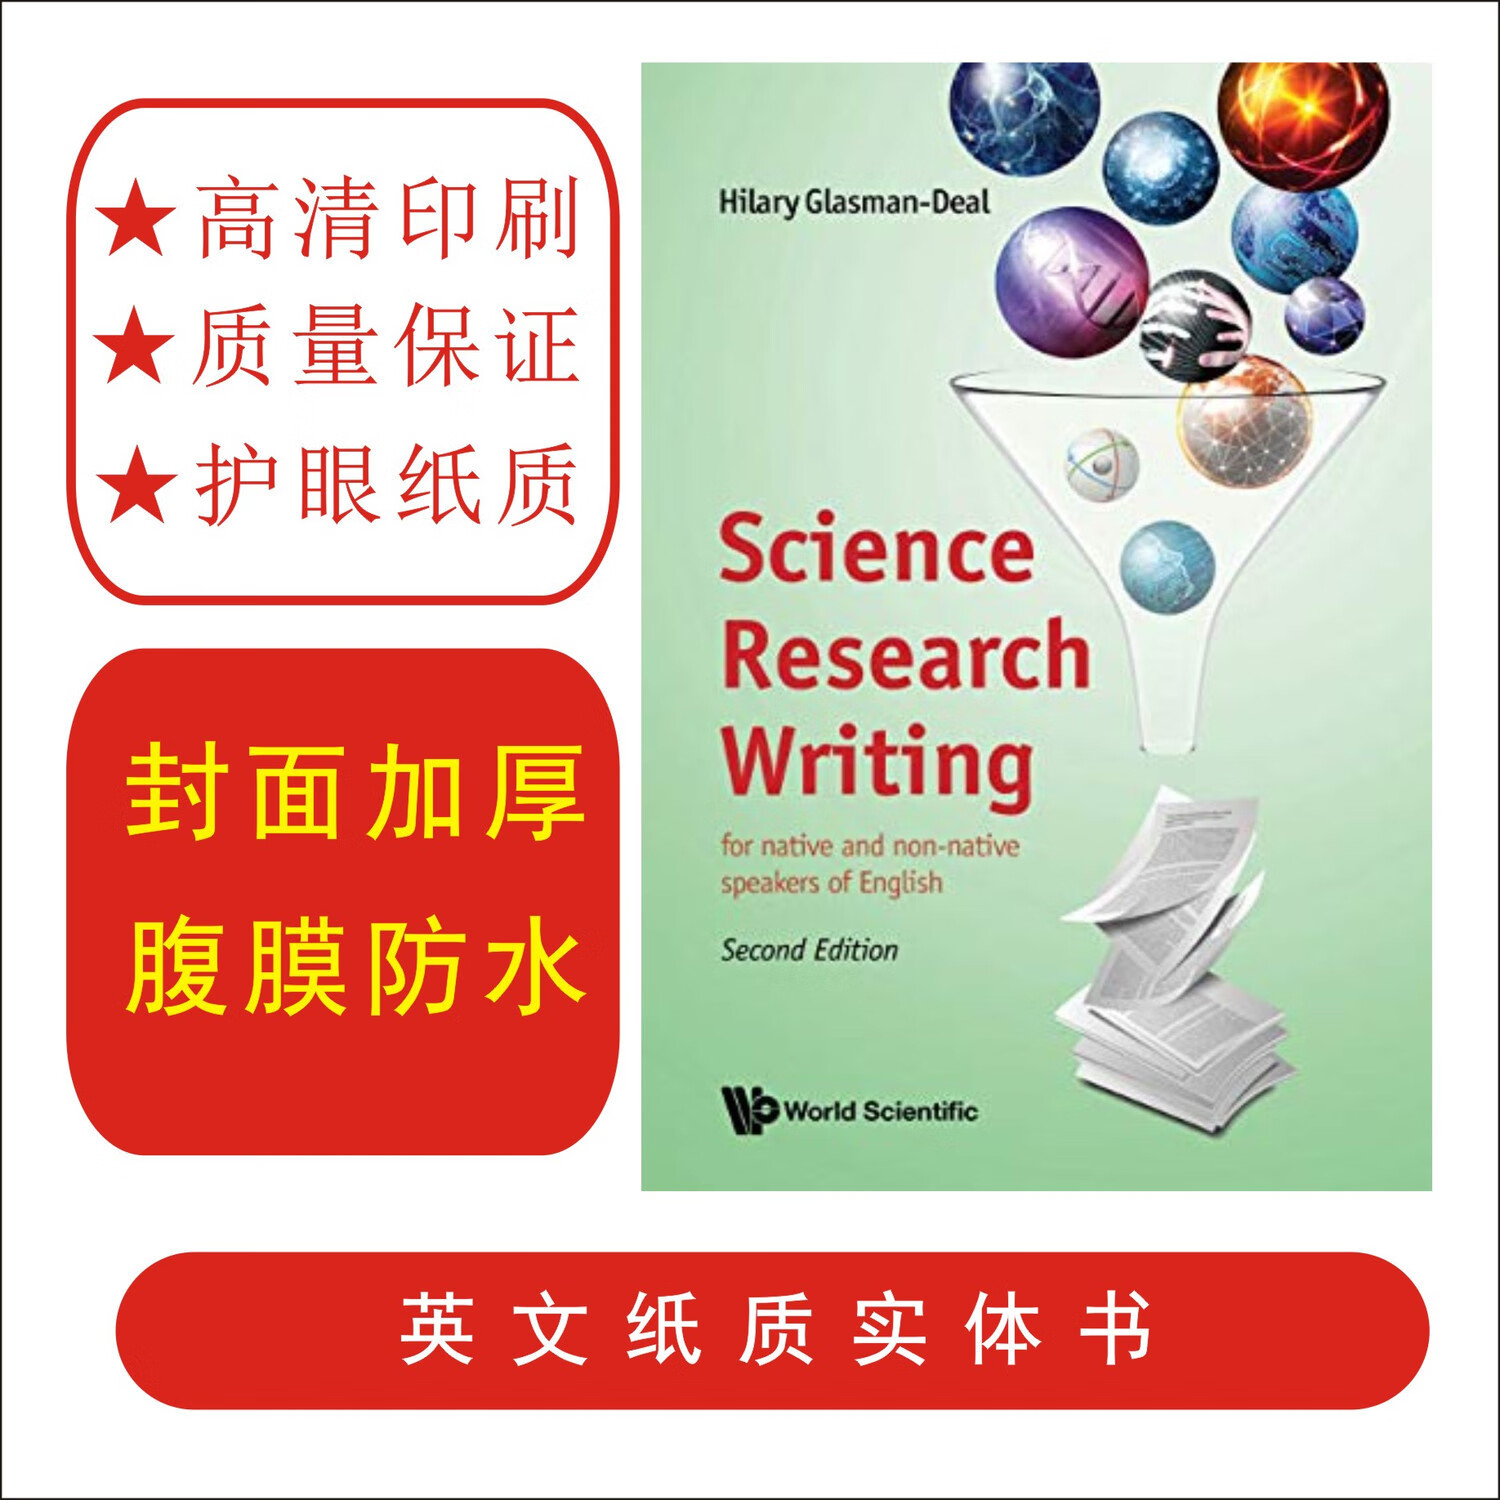 science Research Writing for Non Native  2nd 第二版高性价比高么？